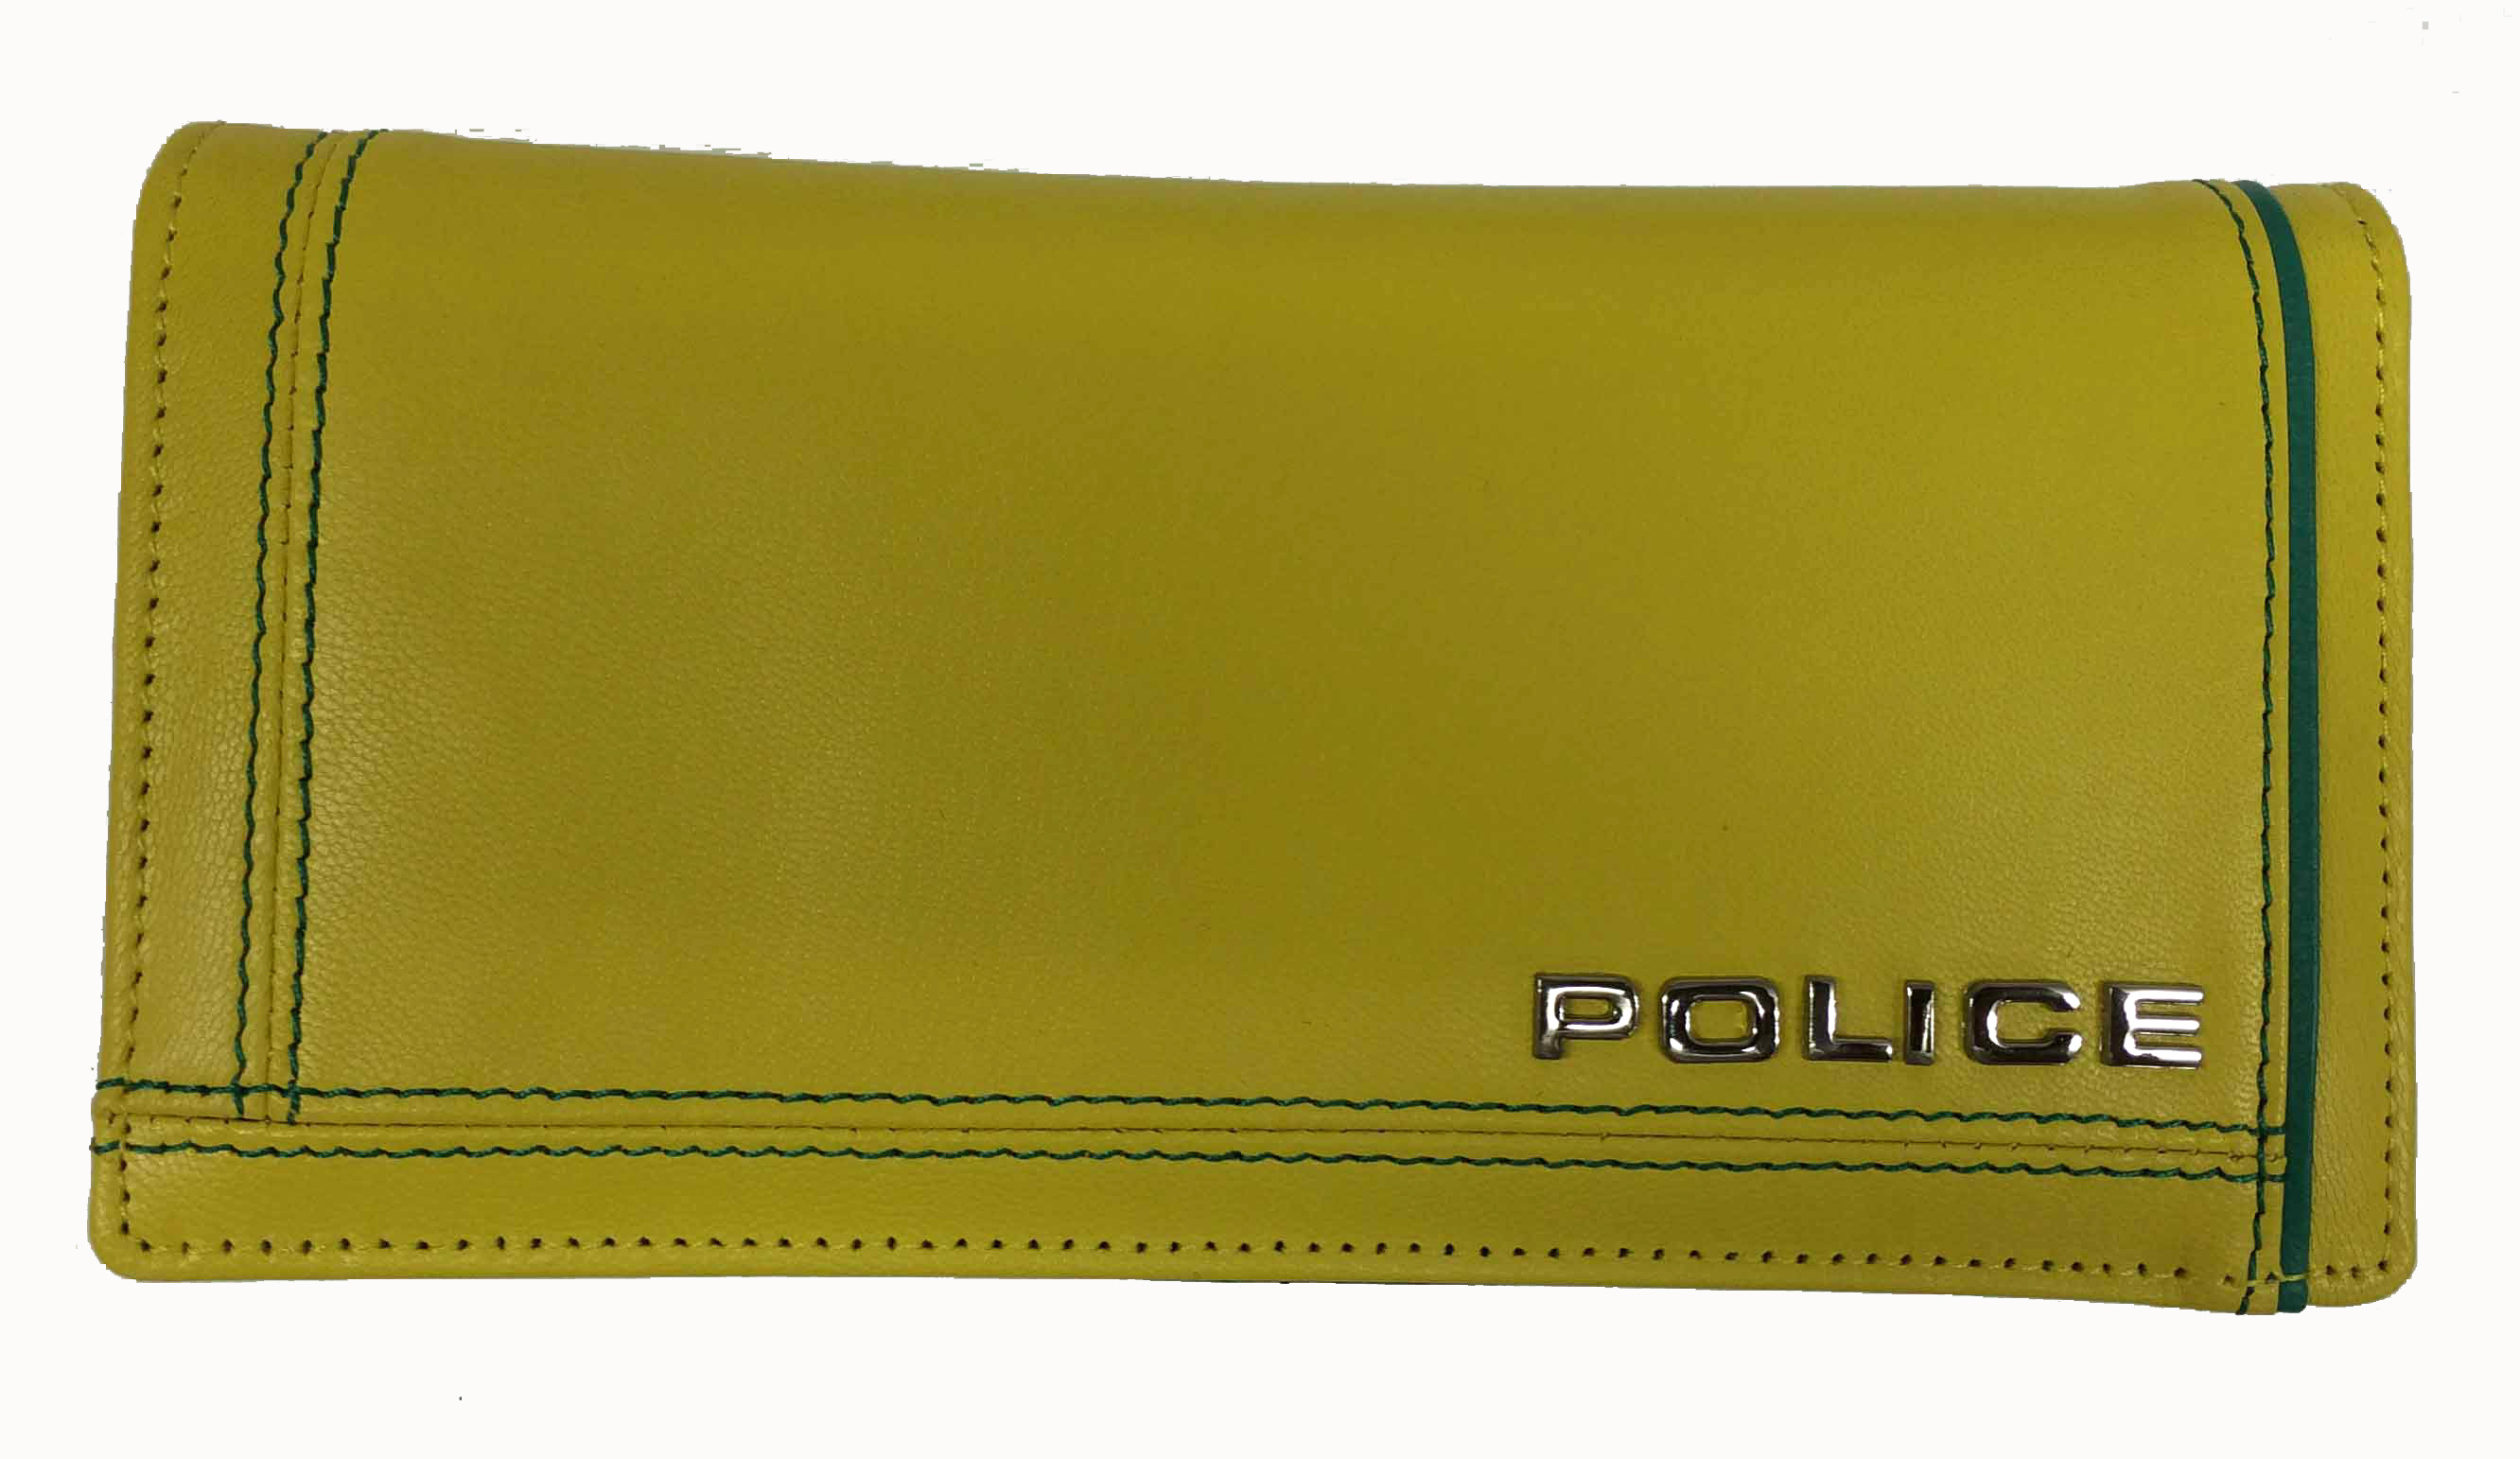 http://www.police.ne.jp/images/police-wallet-colore-yellow_2_00.jpg